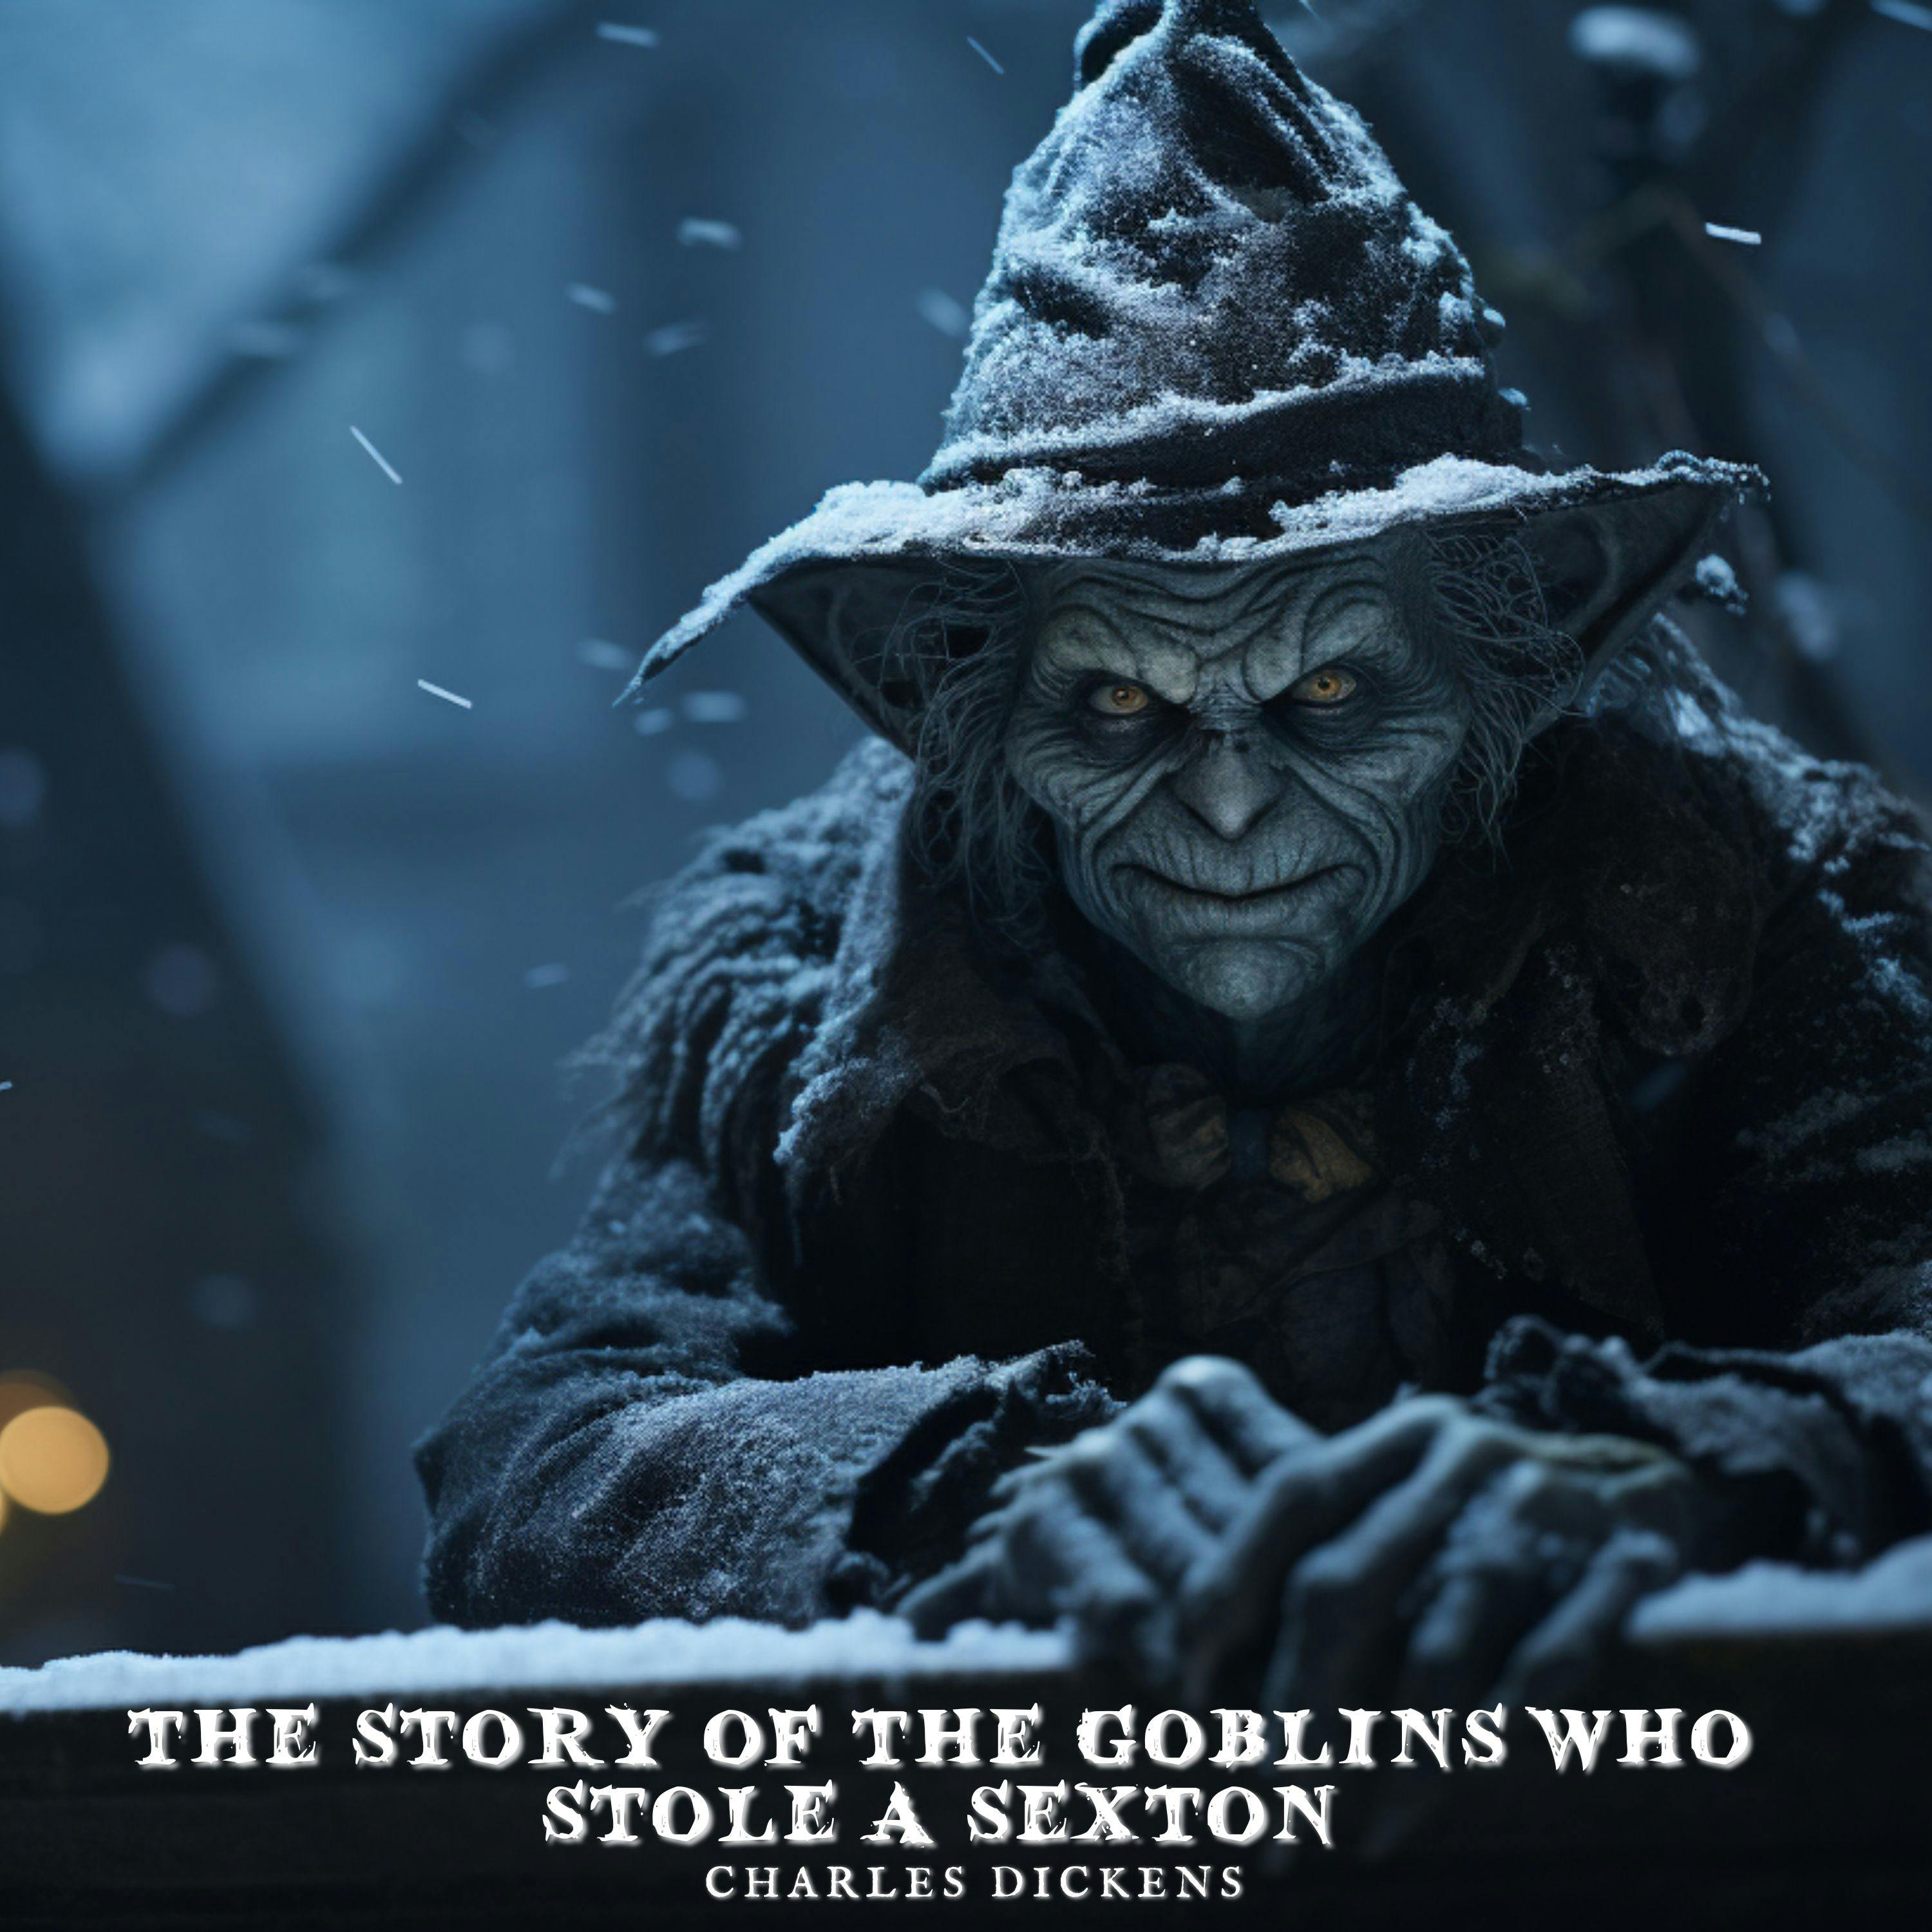 The Story Of The Goblins Who Stole A Sexton by Charles Dickens